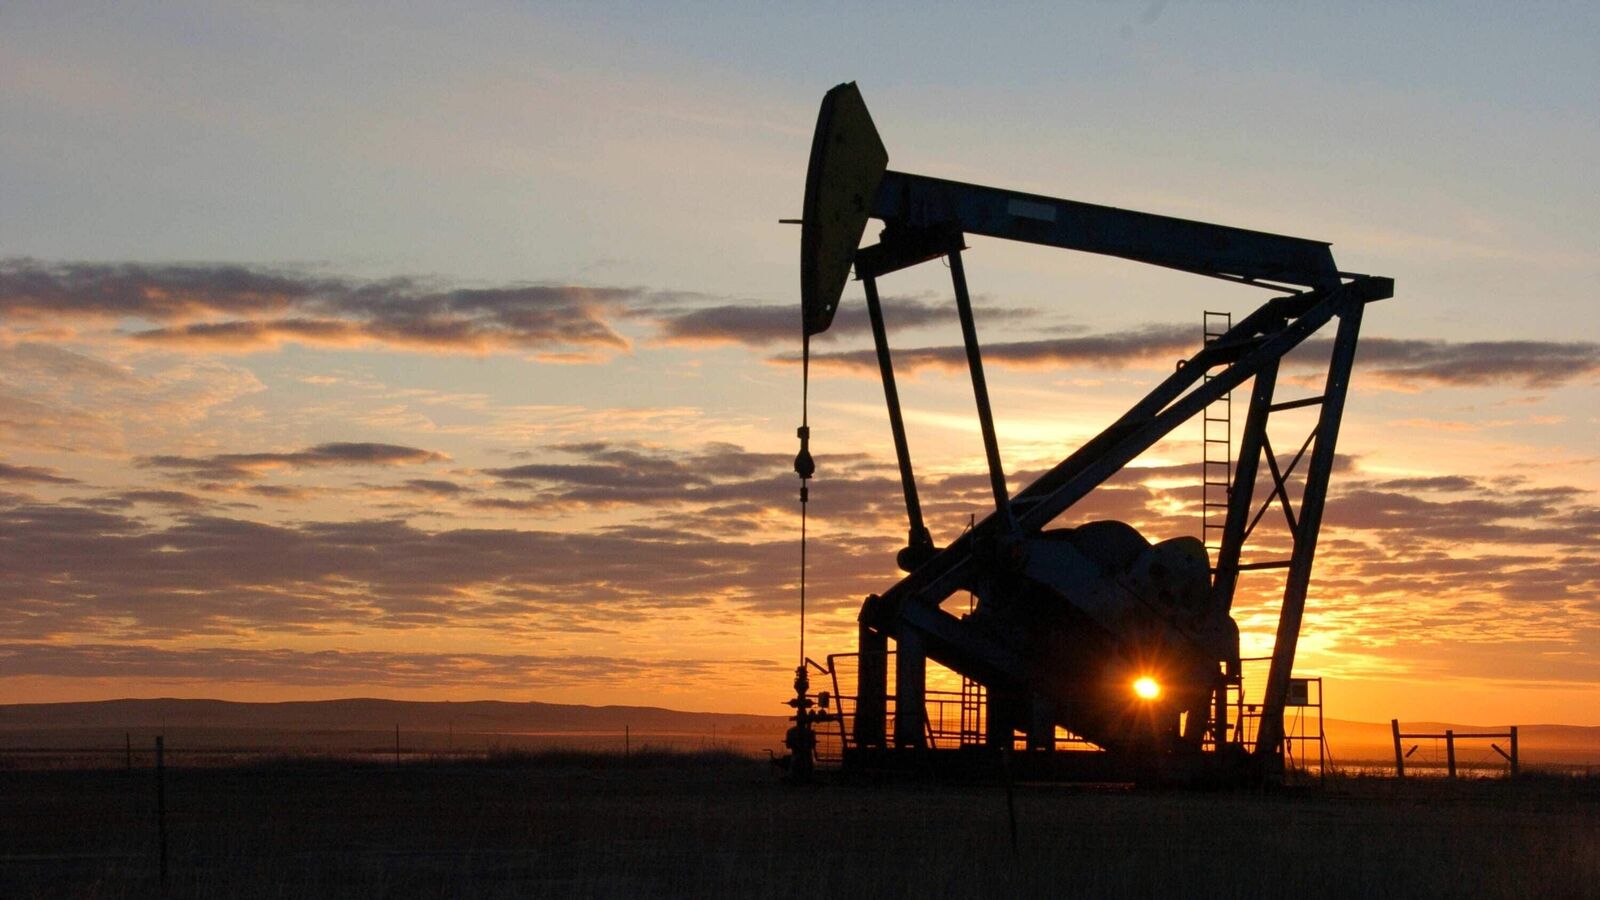 Oil remains steady despite demand uncertainty; brent crude at $84.23/bbl